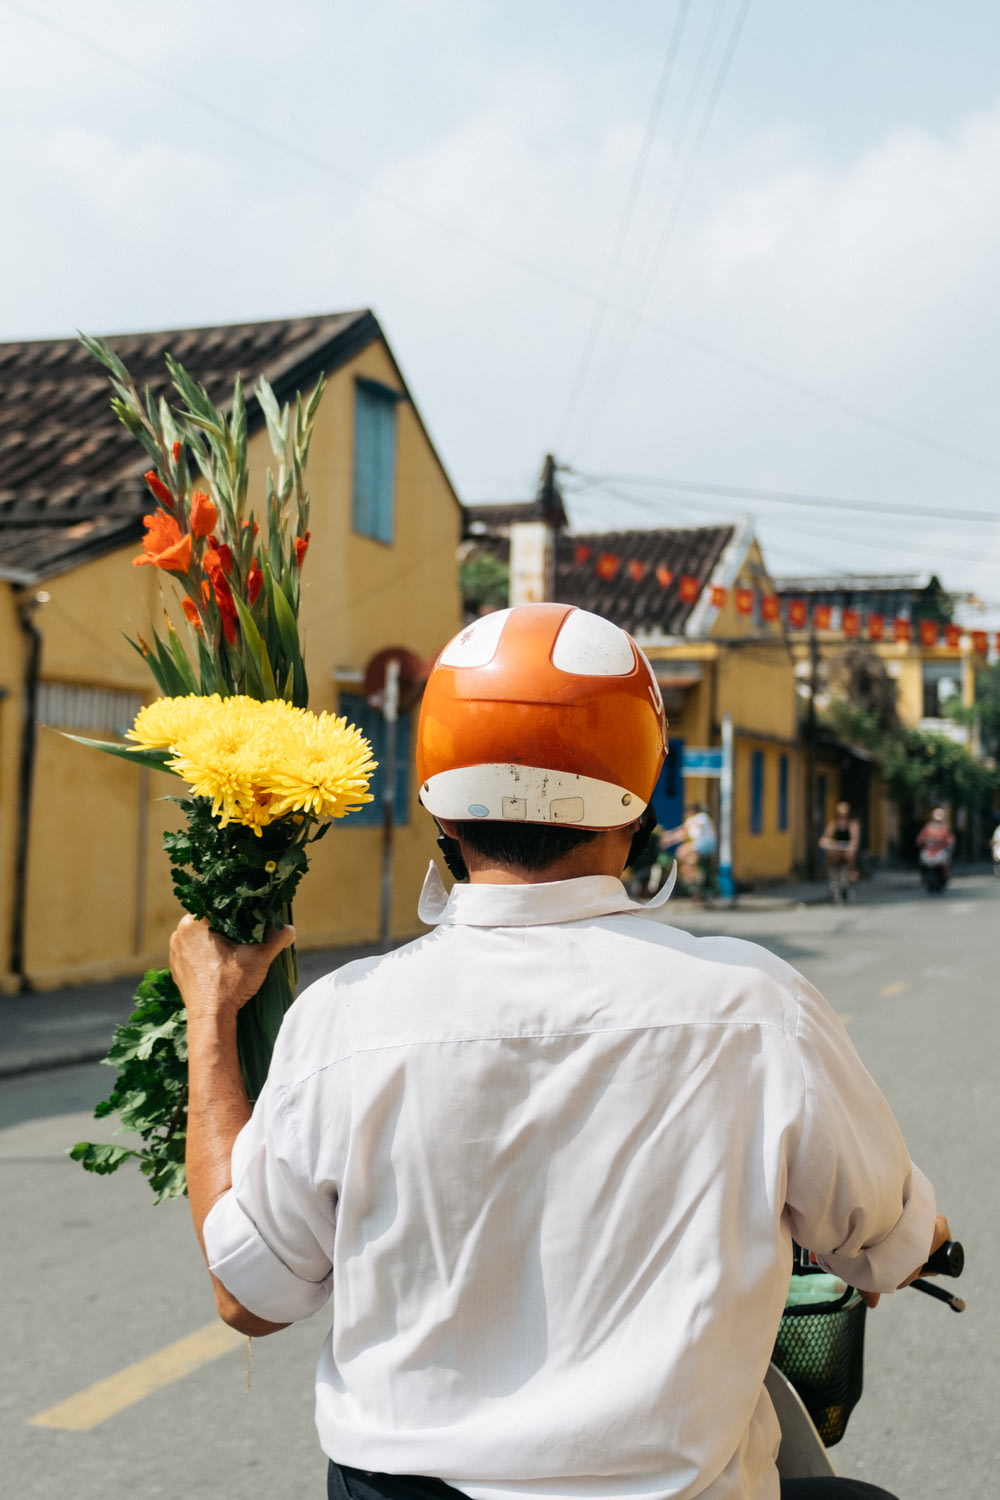 person riding motorcycle while holding yellow petaled flowers during daytime